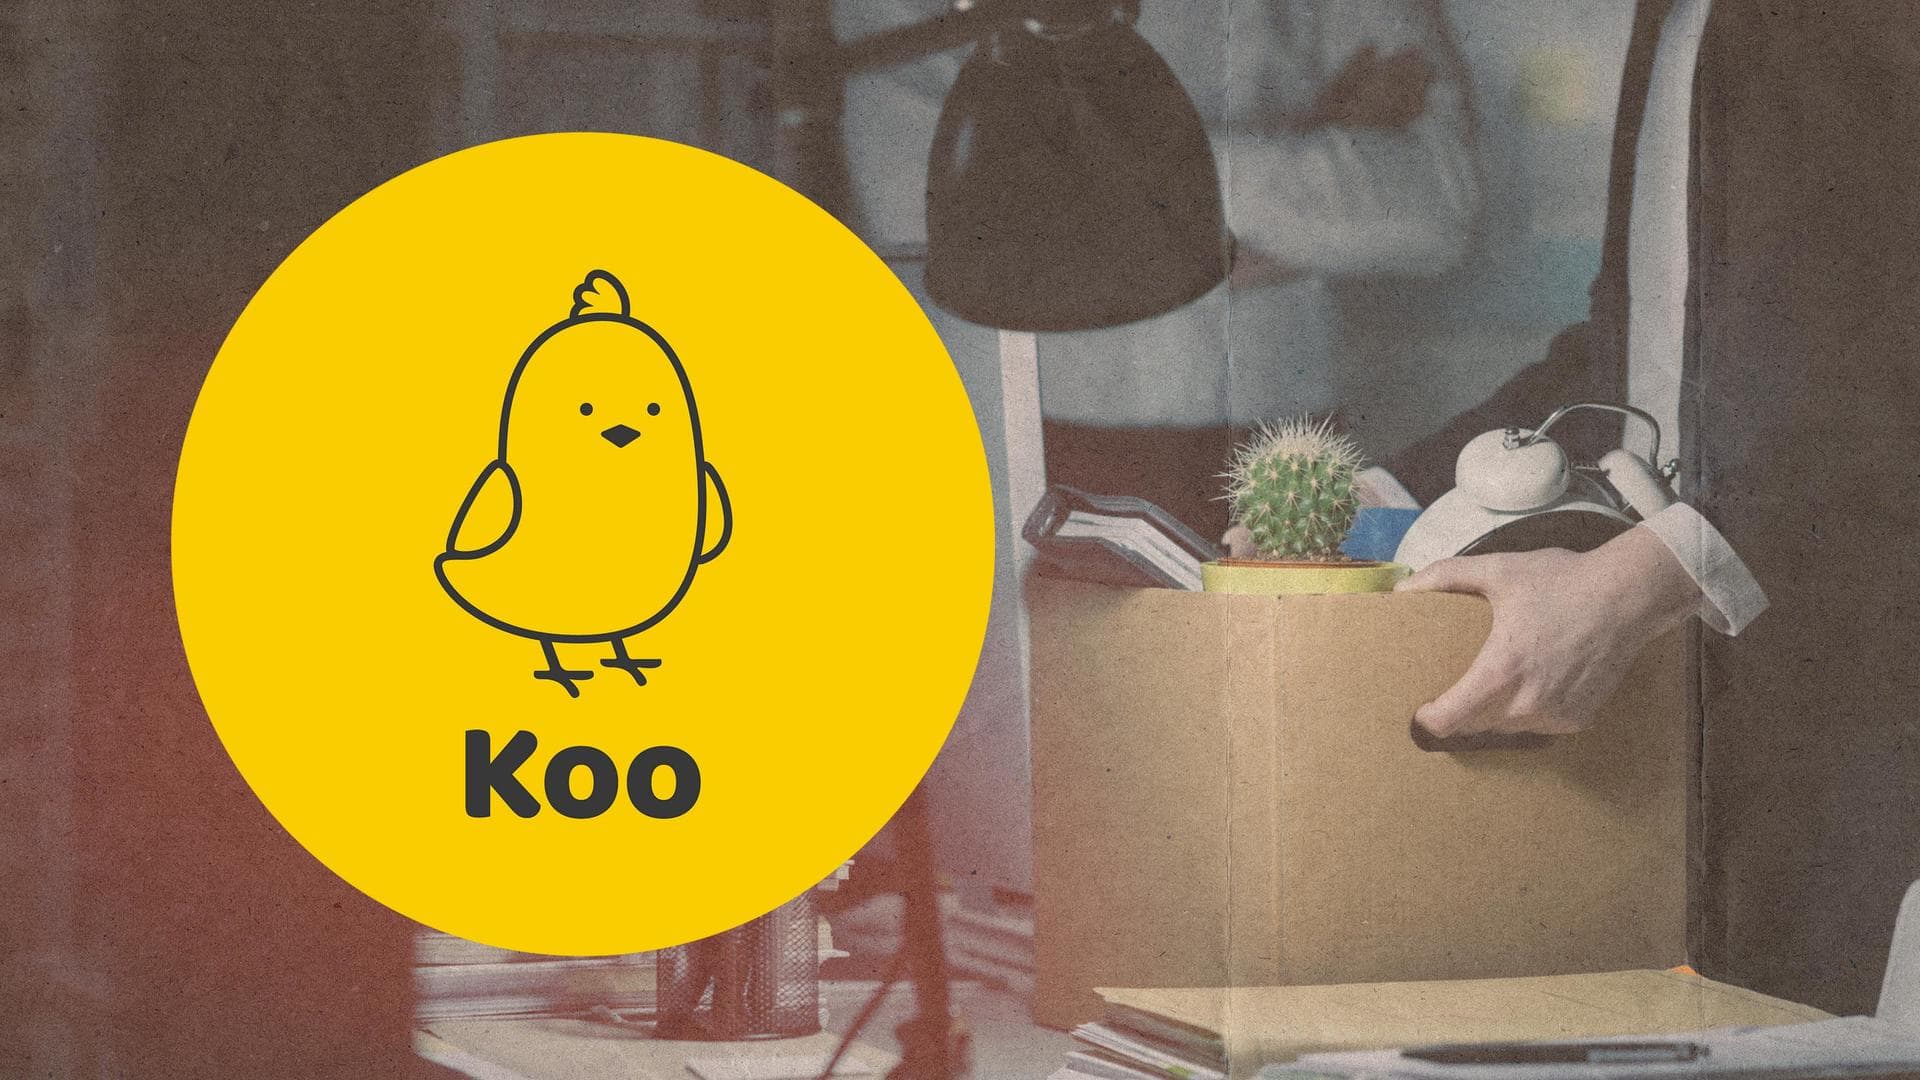 Twitter-rival Koo lays off 30% of employees: Here's why